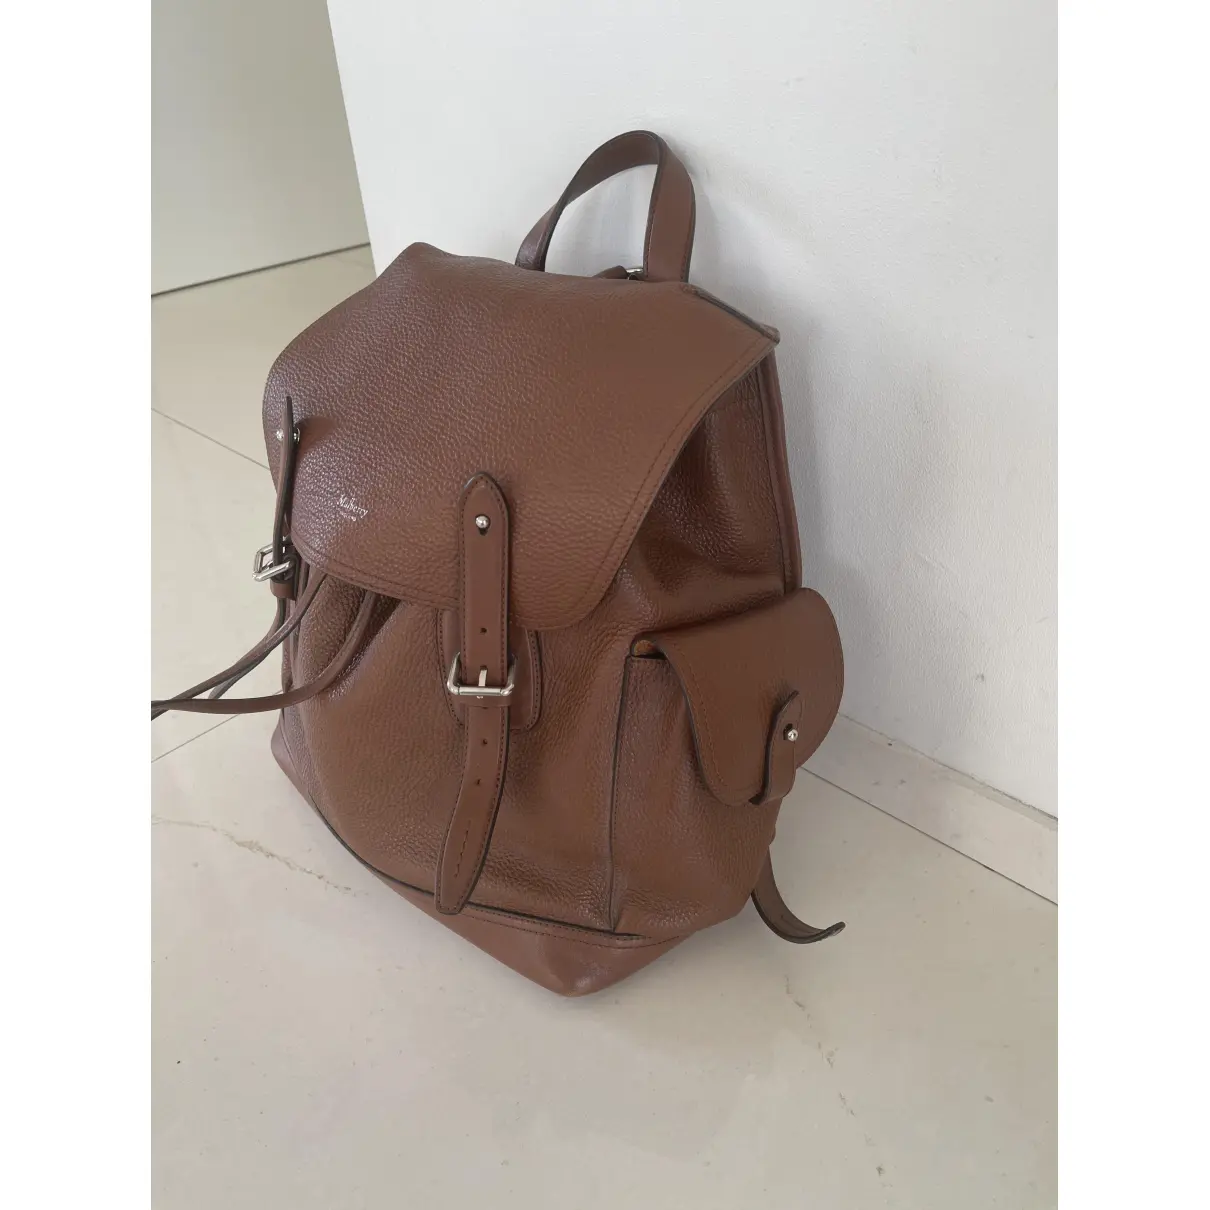 Buy Mulberry Heritage leather satchel online